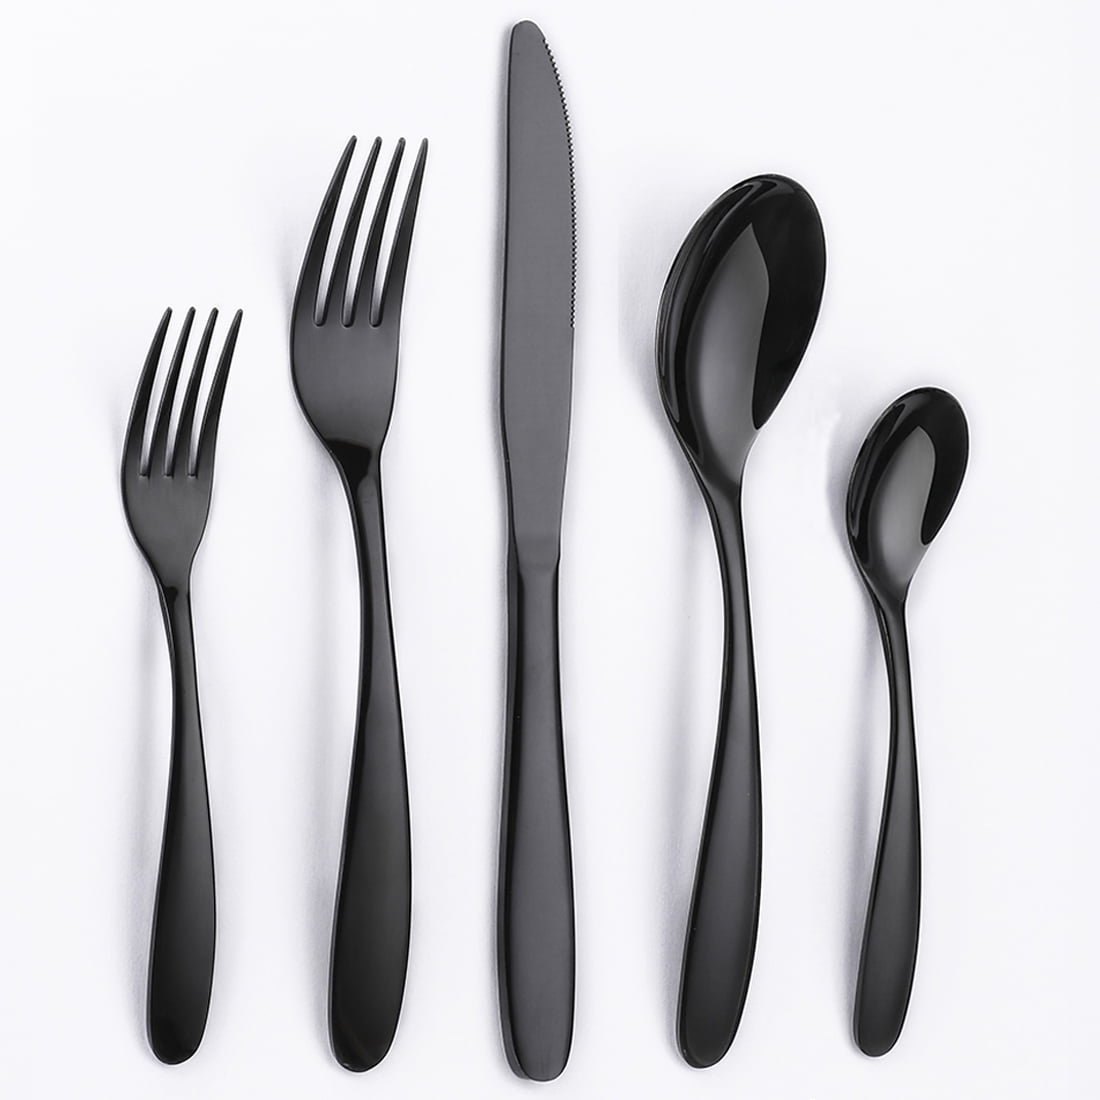 Silverware Sets, JOW 20 Pieces Stainless Steel Flatware Set Service for 4, Tableware Cutlery Set for Home and Restaurant, Knives Forks Spoons, Mirror Polished, Dishwasher Safe (Black)